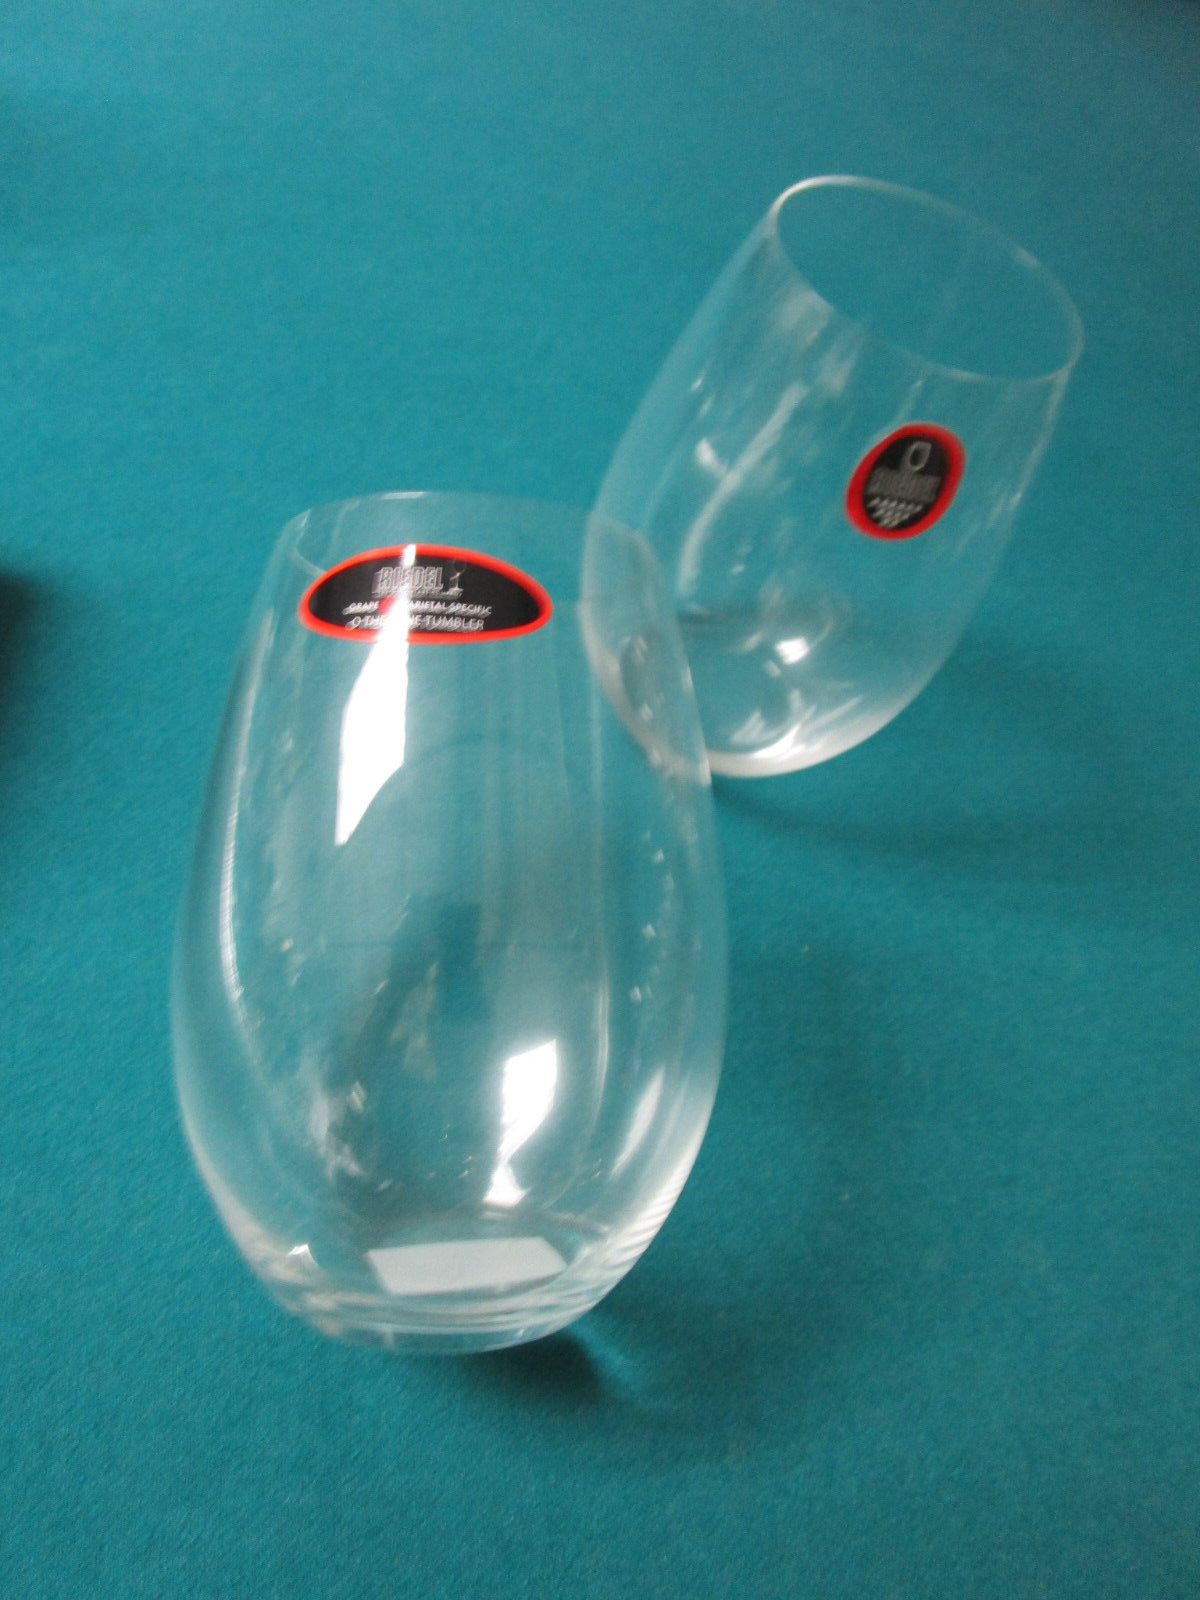 Primary image for RIEDEL  AUSTRIA GERMANY GLASSWARE 2 PINOT NEBIOLO GLASSES [*RIEDELMIX]